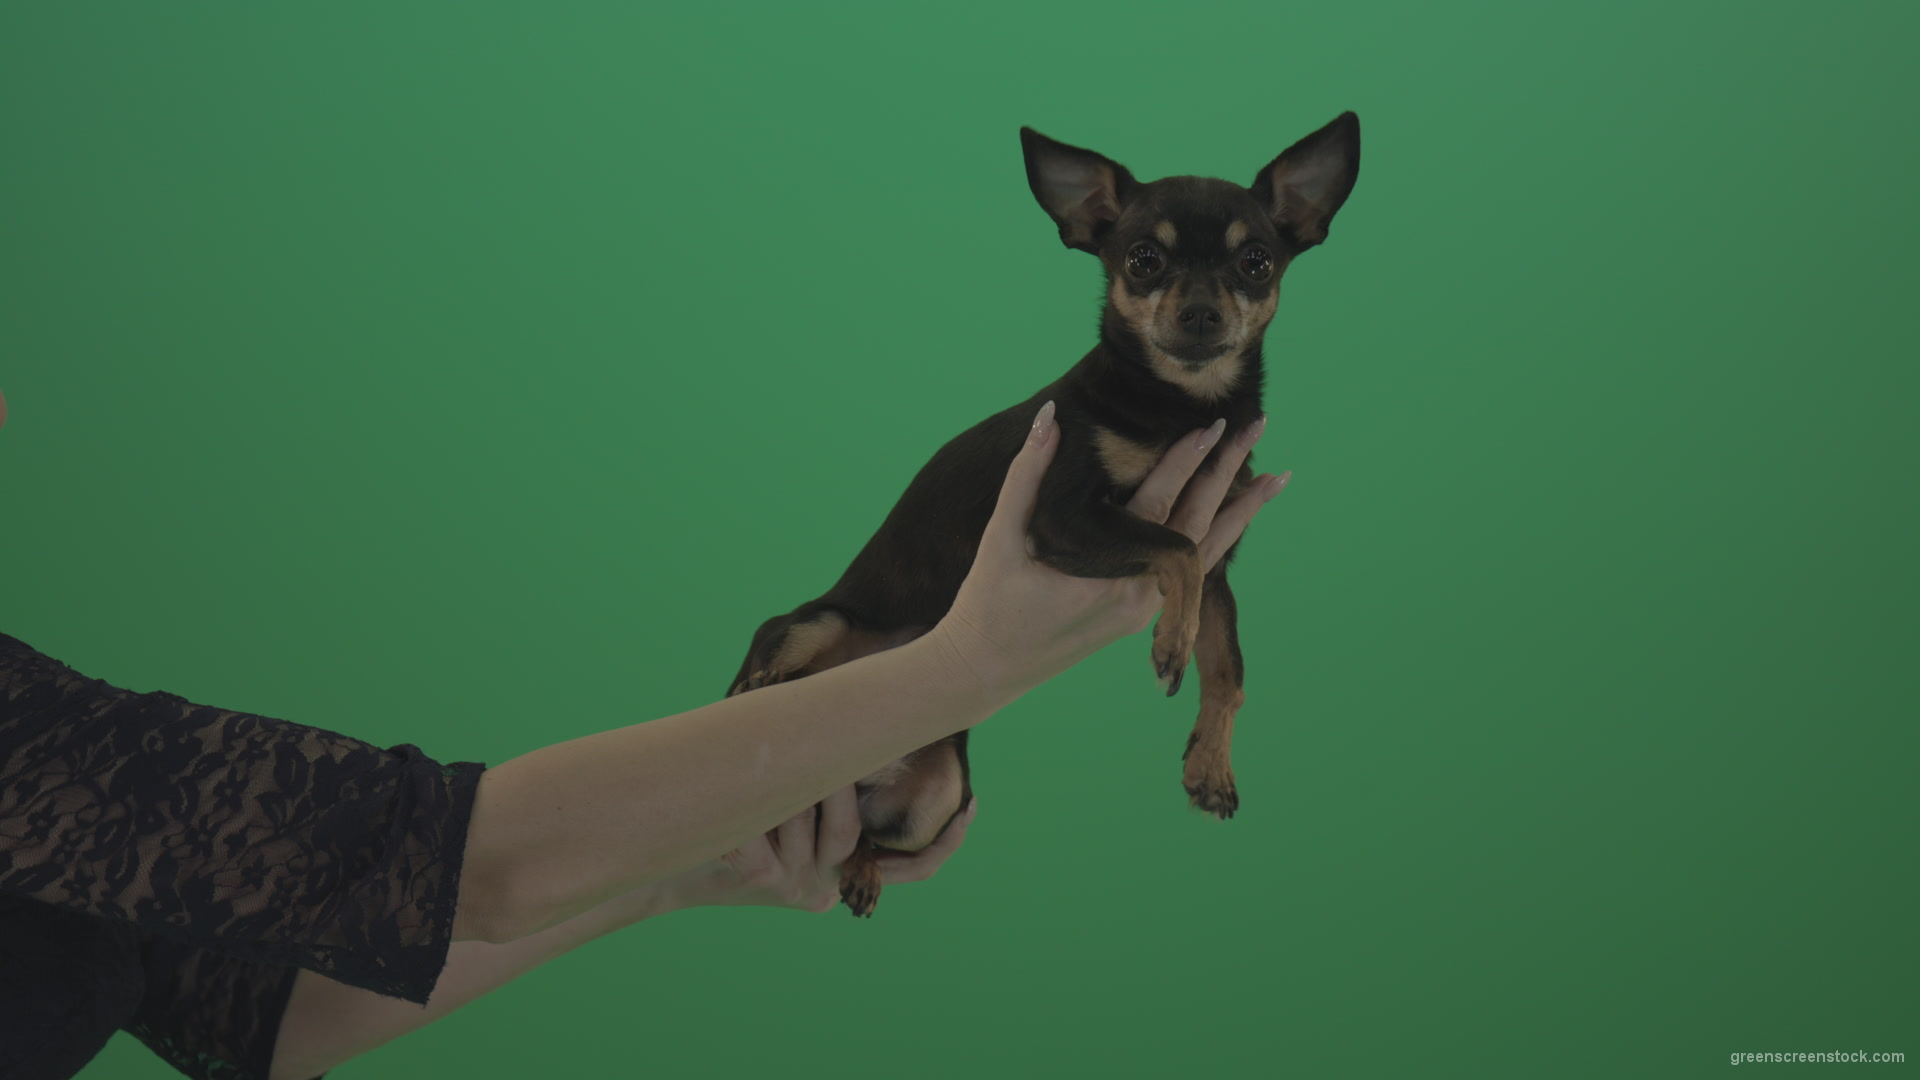 Black-funny-Chihuahua-small-dog-in-female-hands-on-green-screen_005 Green Screen Stock